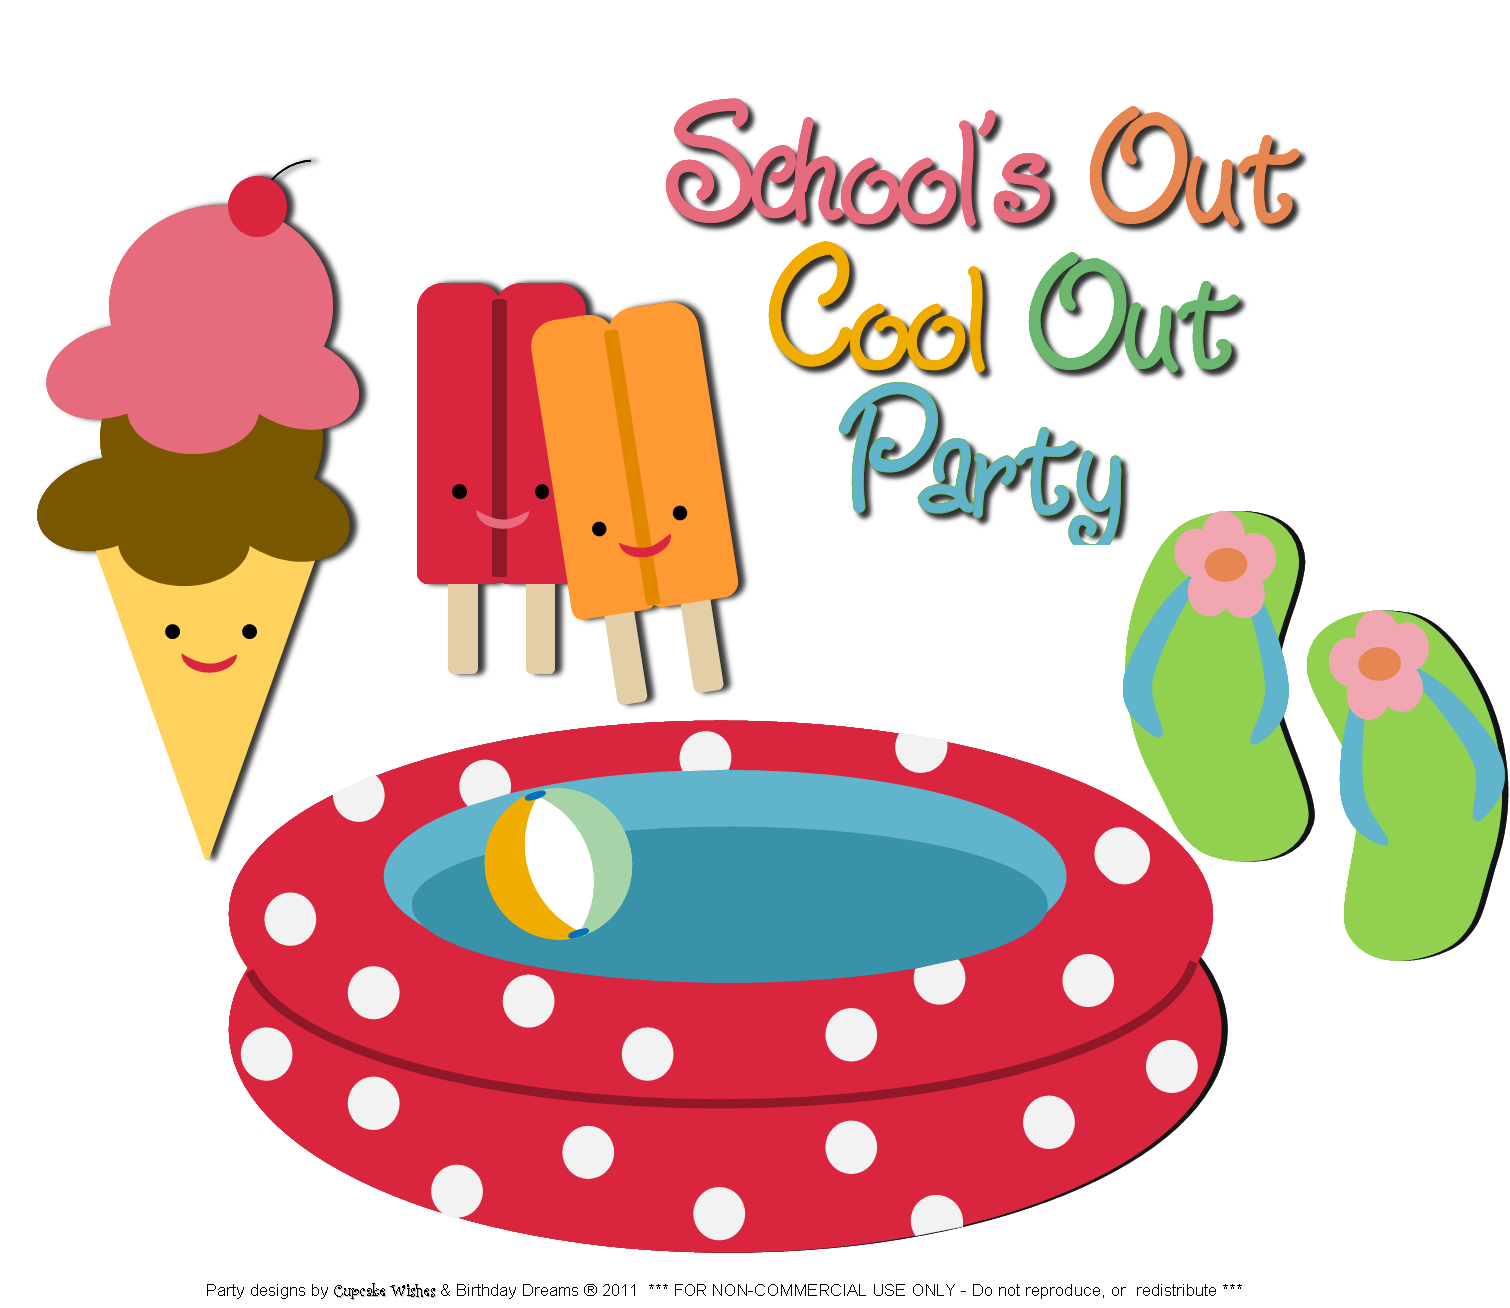 Dreams   Party Starters  Make A Splash  With A School S Out Cool Out